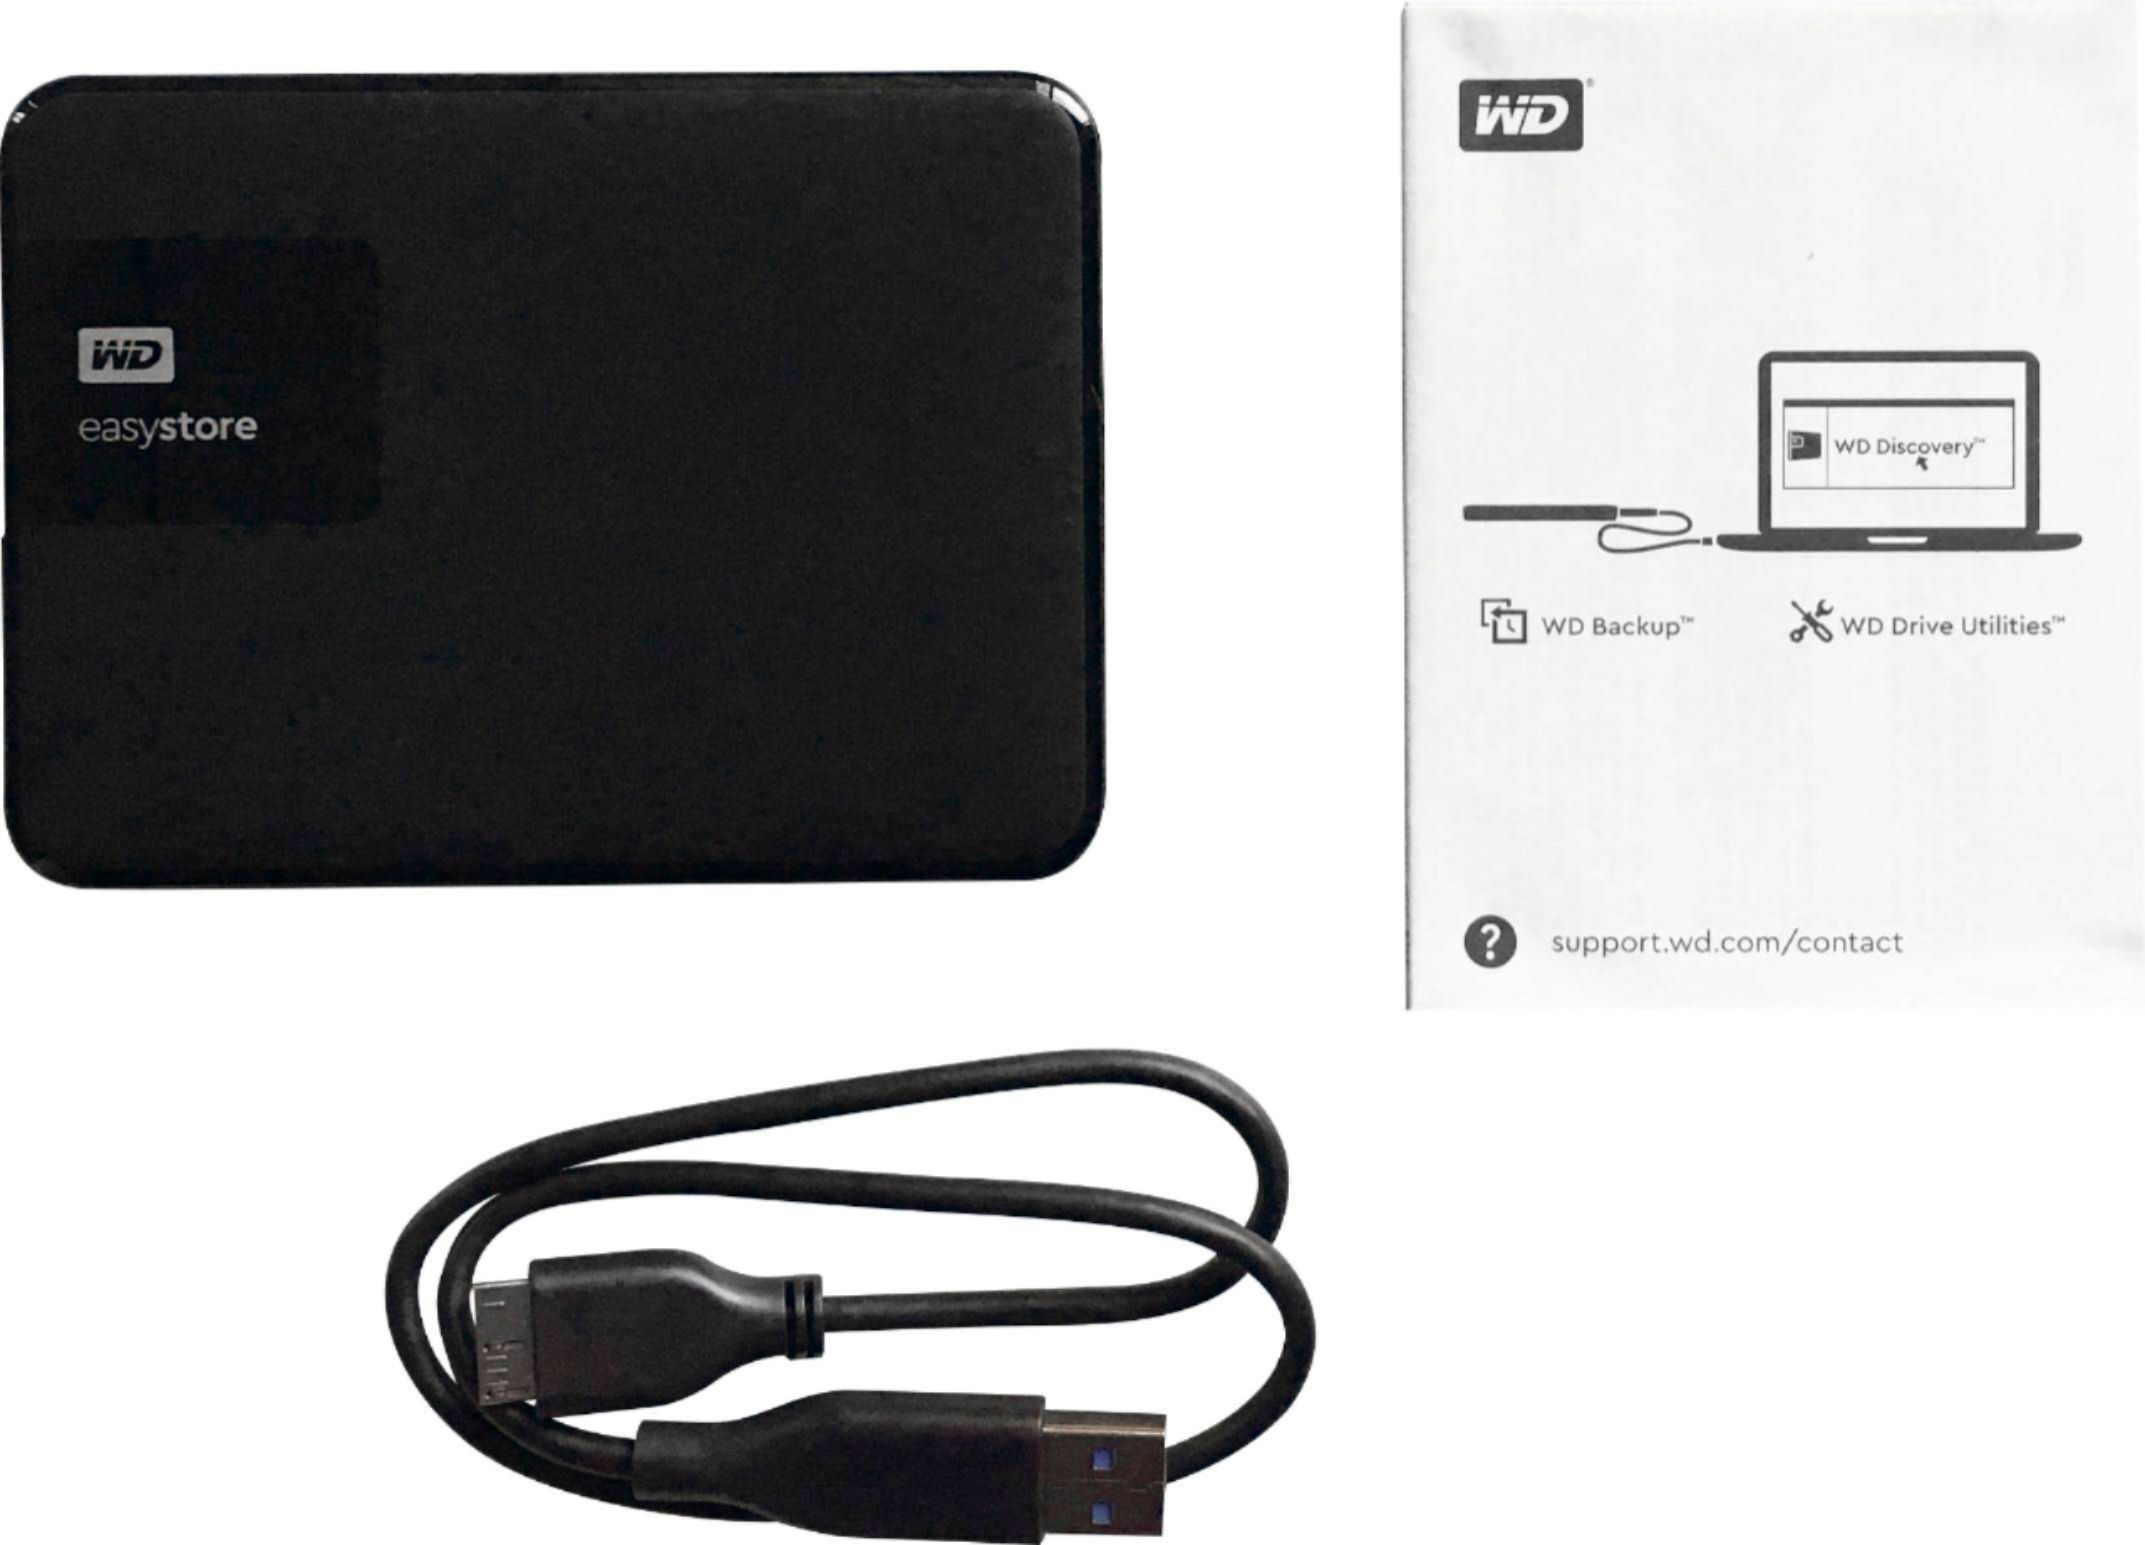 WD EASYSTORE PORTABLE 4TB ブラック ポータブルHDD - PC/タブレット